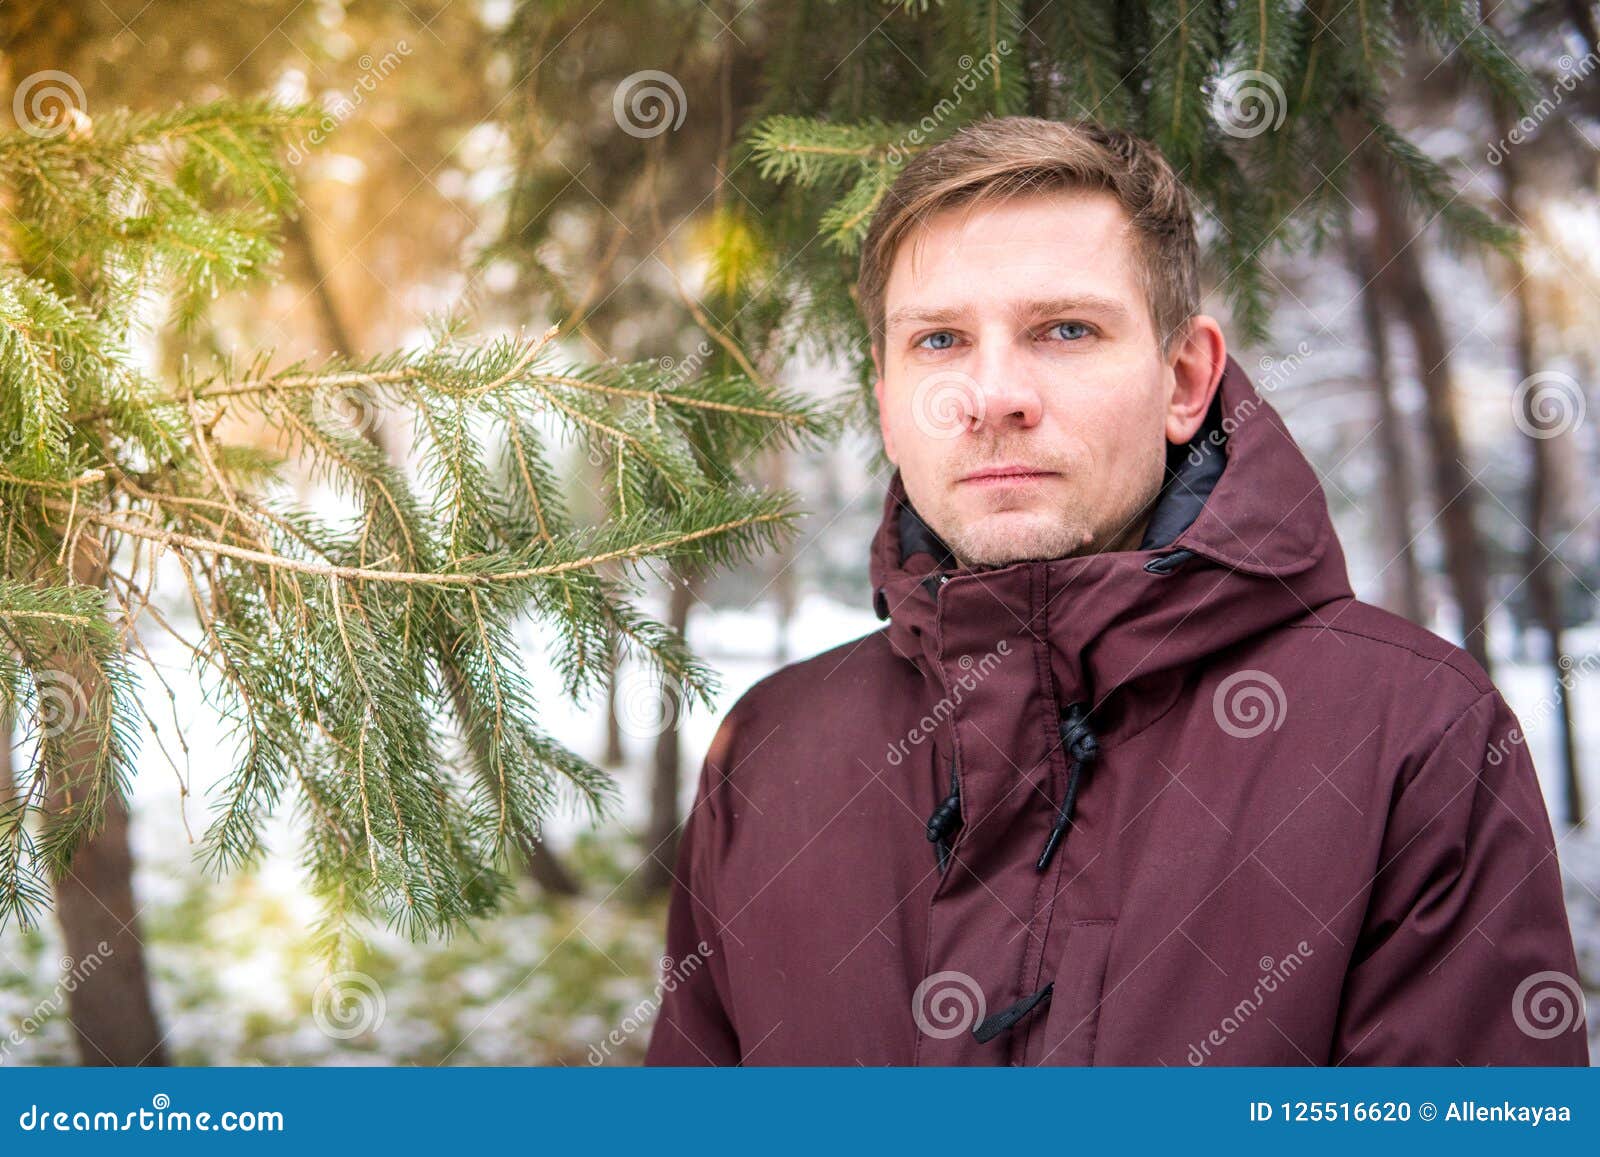 Portrait of a Man in a Winter Forest Near a Spruce Stock Photo - Image ...